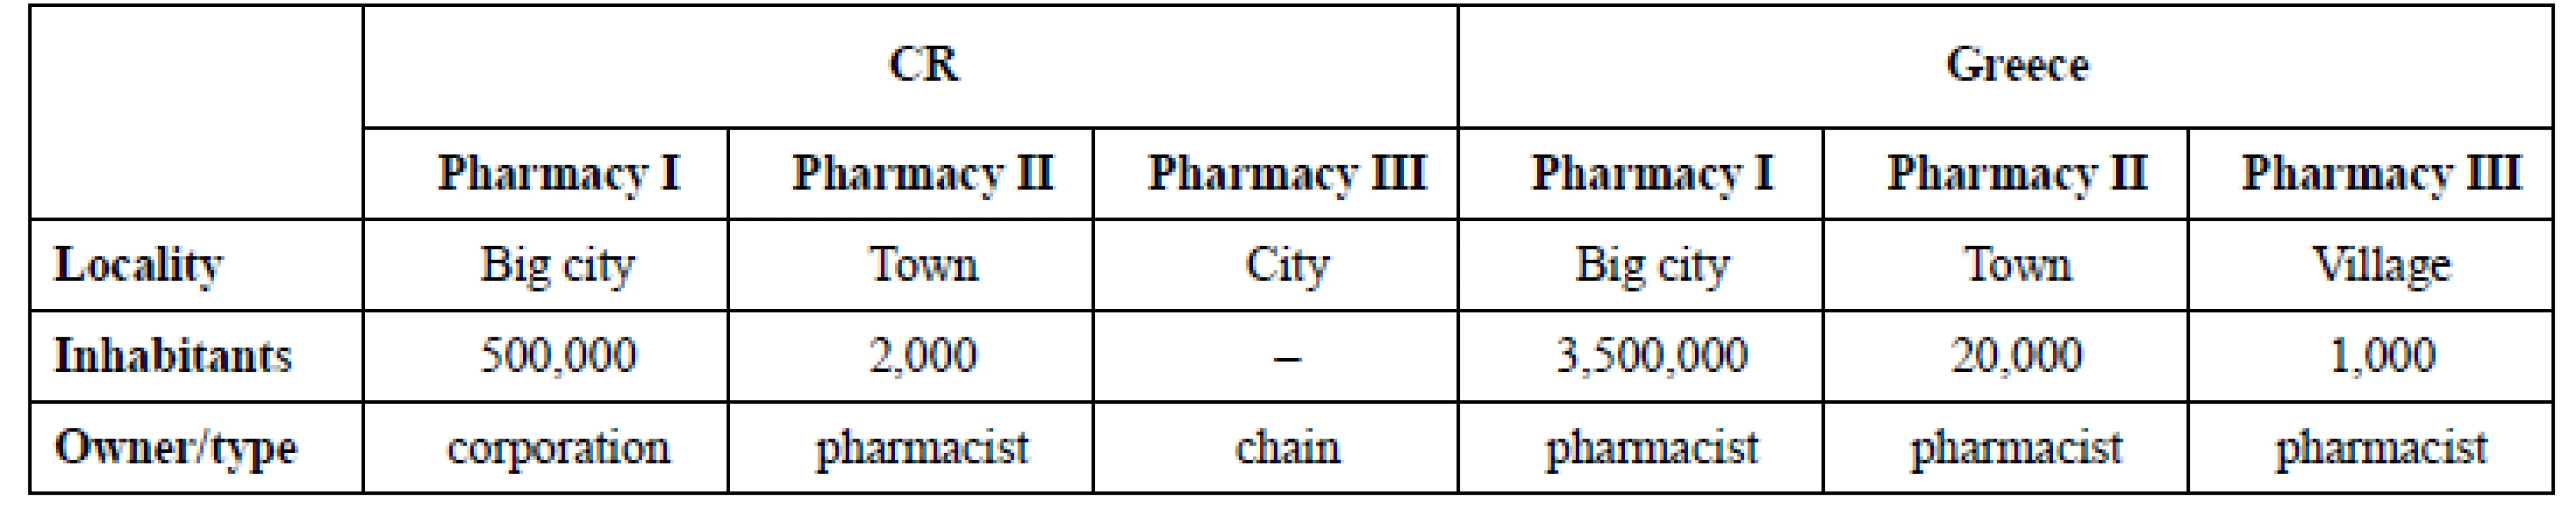 Description of pharmacies that took part in the research